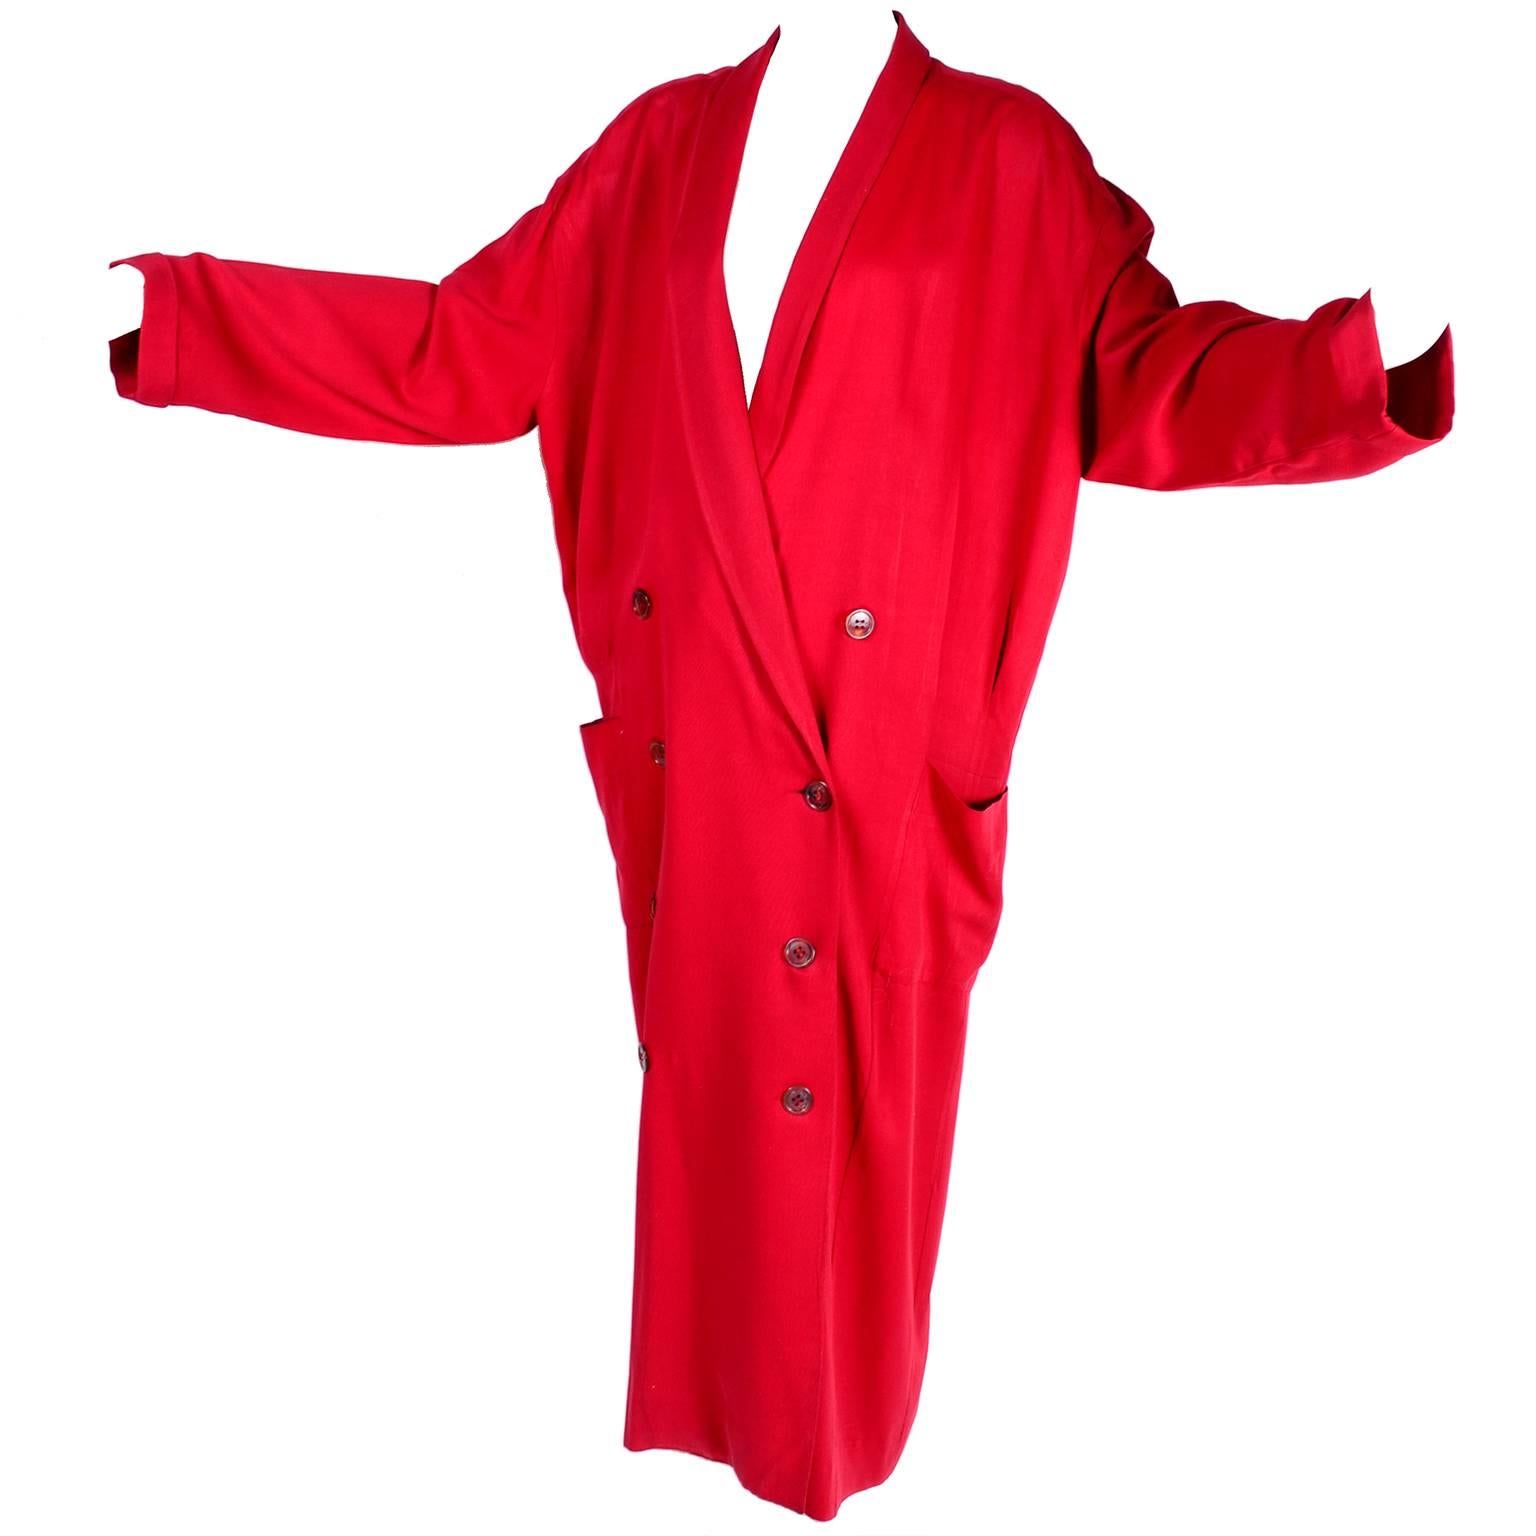 This is a stunning vintage oversized rich red coat from Norma Kamali. This stylish 80s double breasted long coat was designed in the 1980s and has rich red satin lining and front pockets.  The coat was made in the USA and is labeled a vintage size